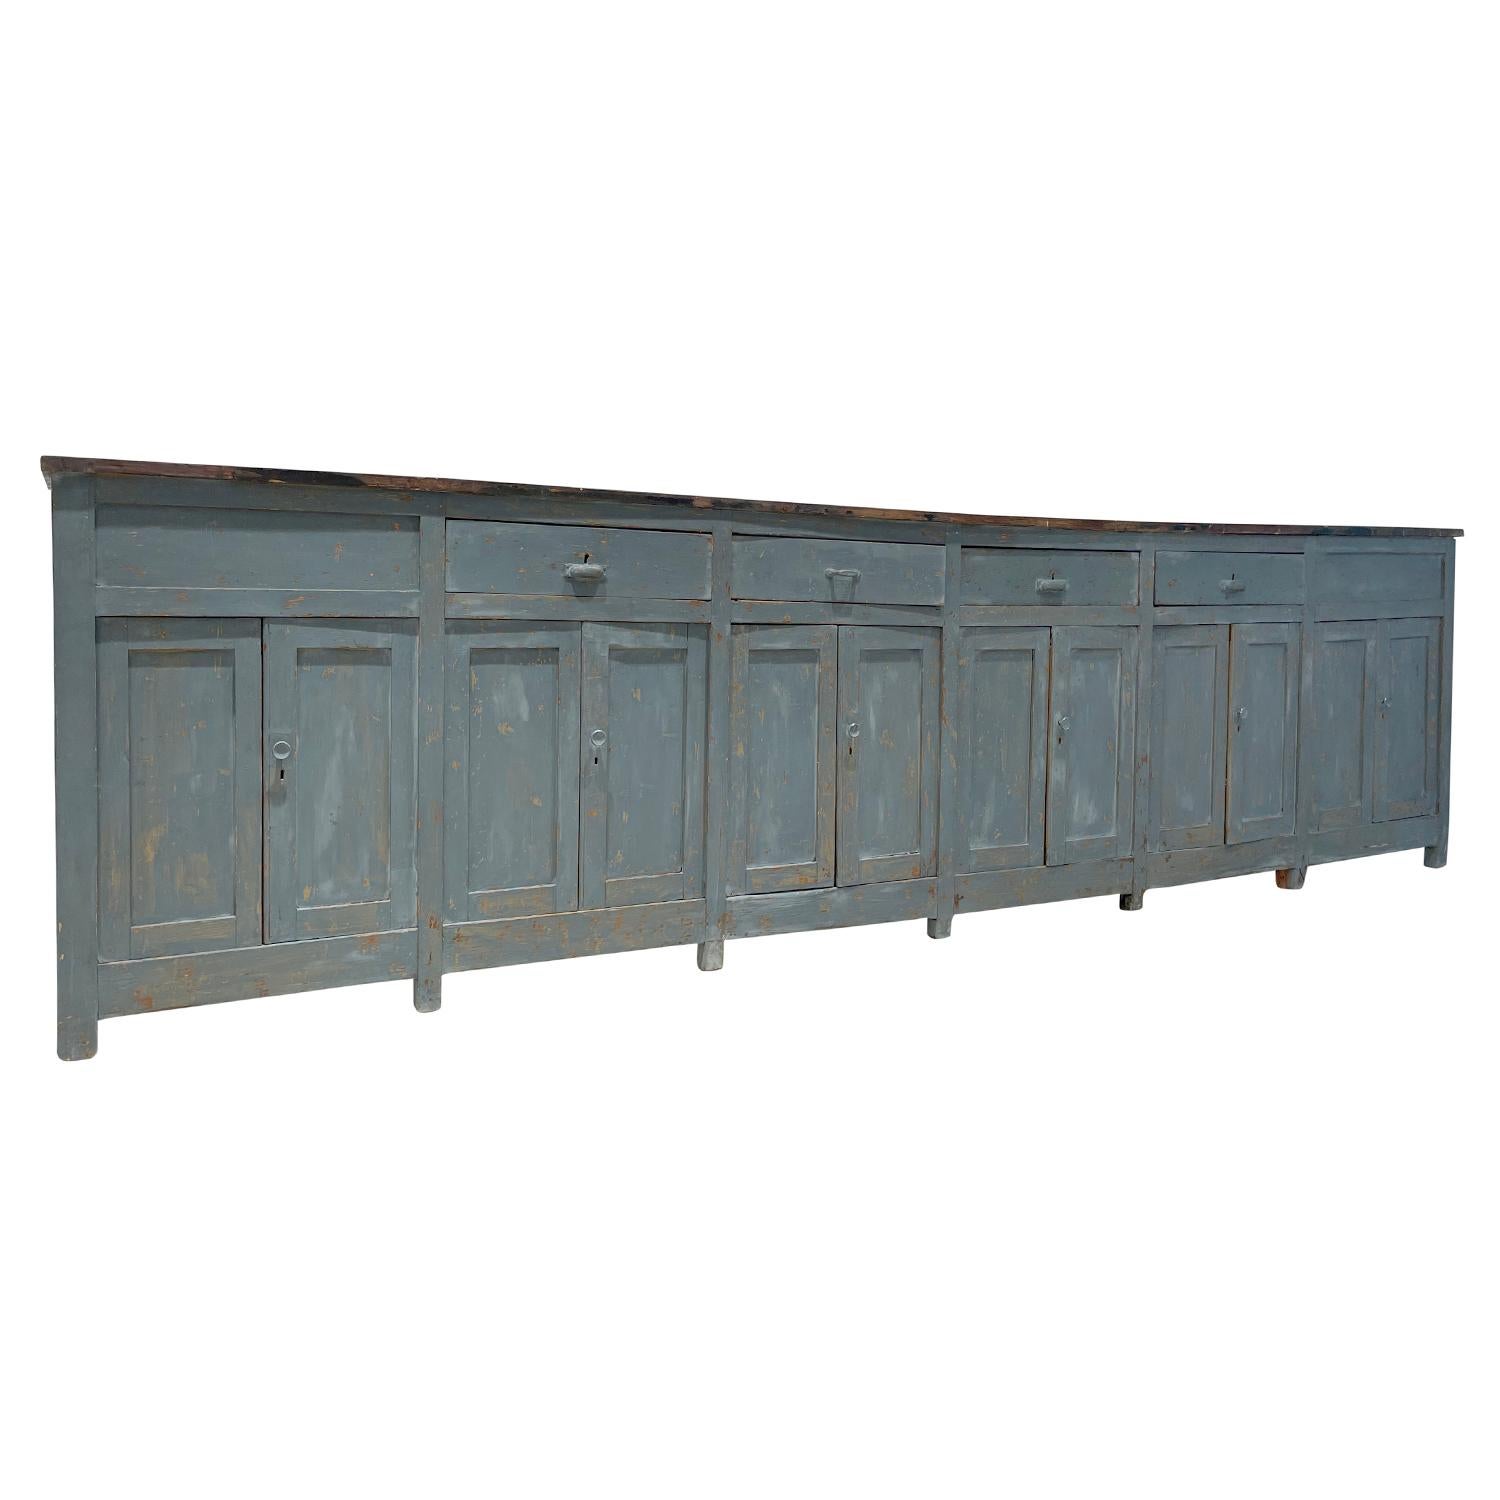 A large, antique Provencal credenza or sideboard in grey blue patina with four drawers and six pairs of doors, in good condition. The top has been painted in irregular hues of bronze tones. Painted Pinewood, minor repairs. Wear consistent with age